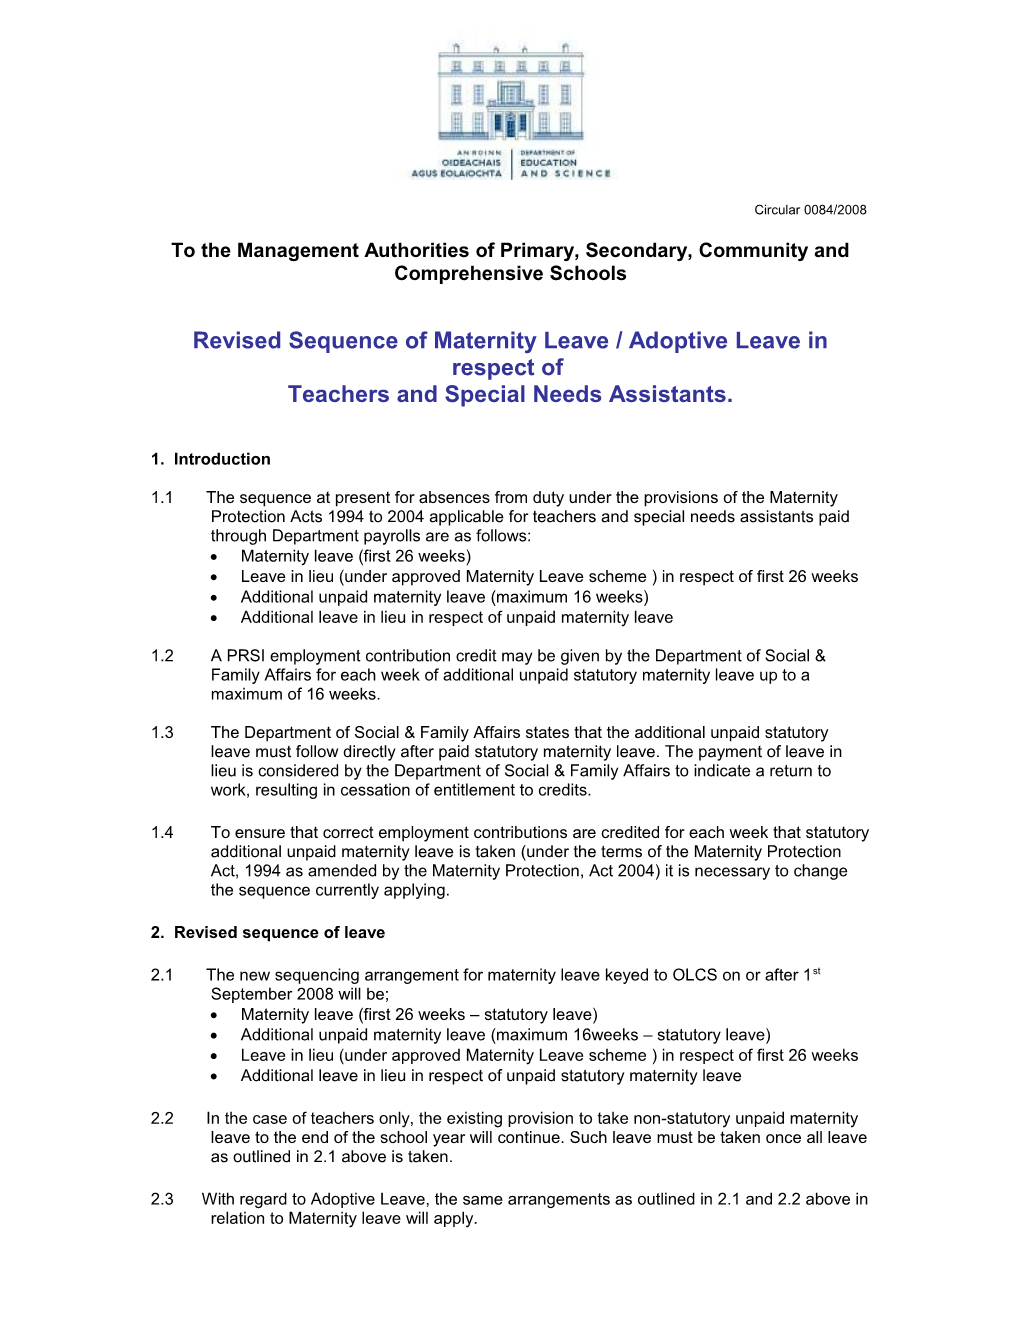 Circular 0084/2008 - Revised Sequence of Maternity Leave / Adoptive Leave in Respect Of